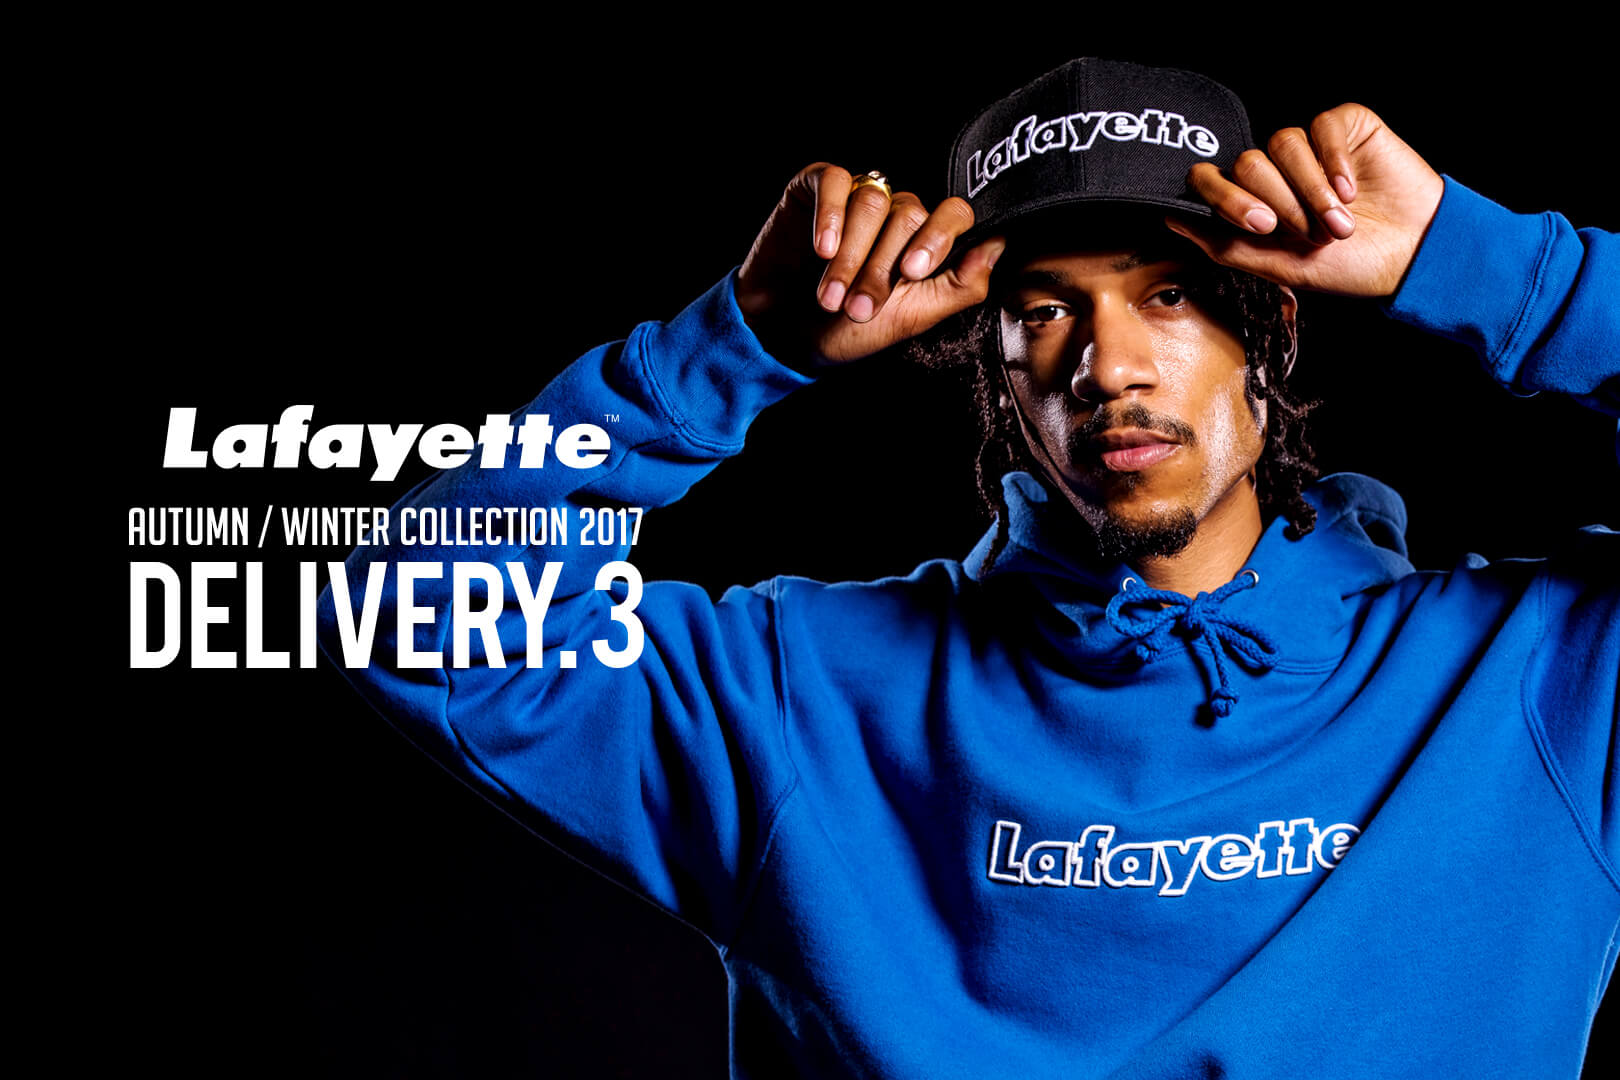 Lafayette 2017 AUTUMN/WINTER COLLECTION – DELIVERY.3